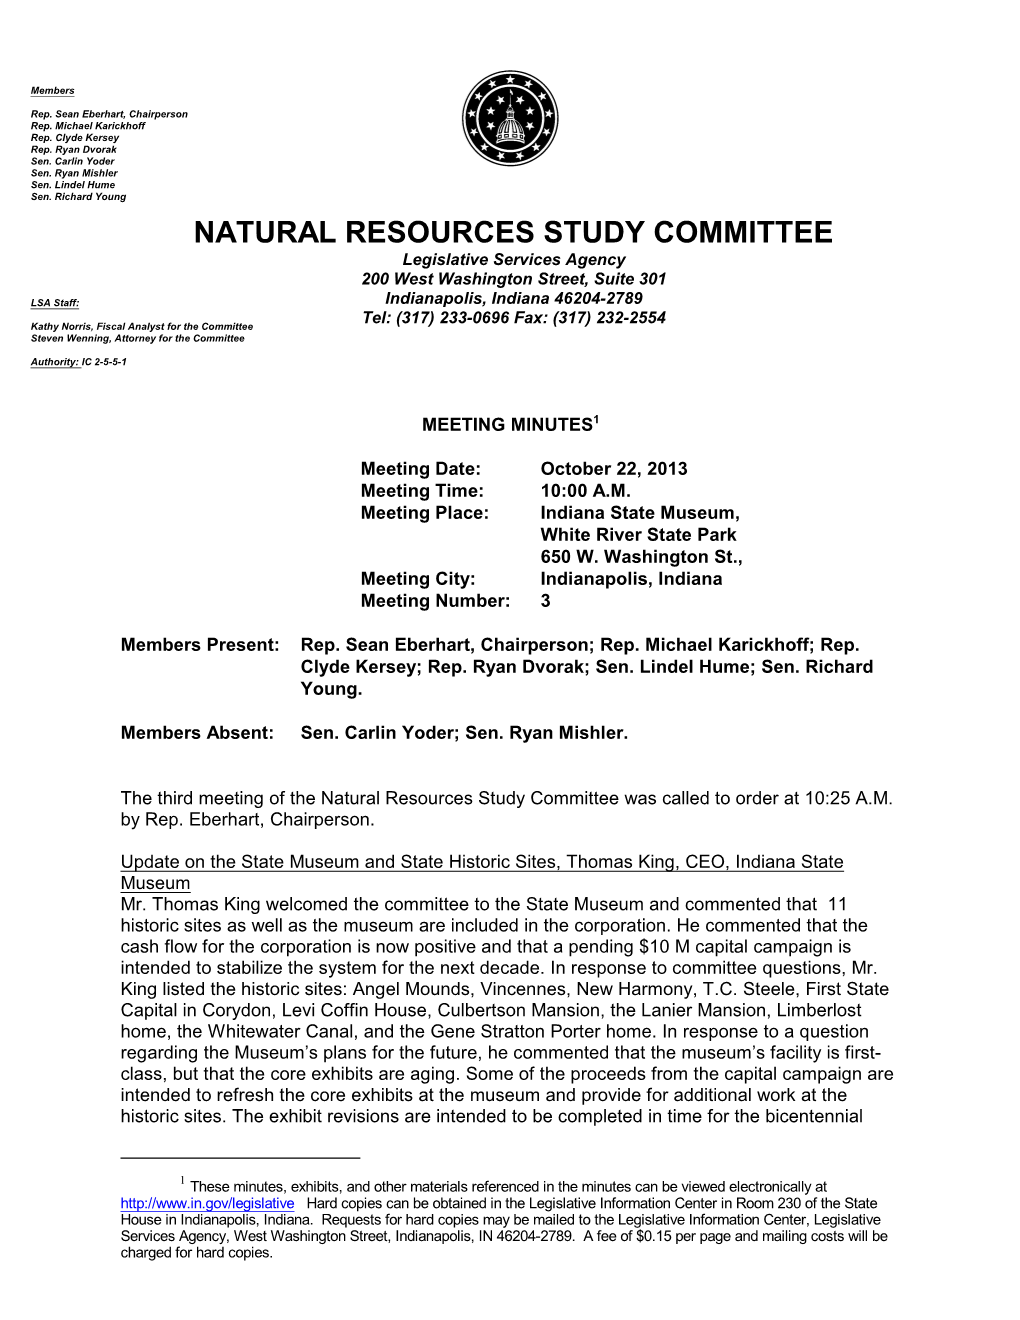 MN 10/22/2013 Natural Resources Study Committee